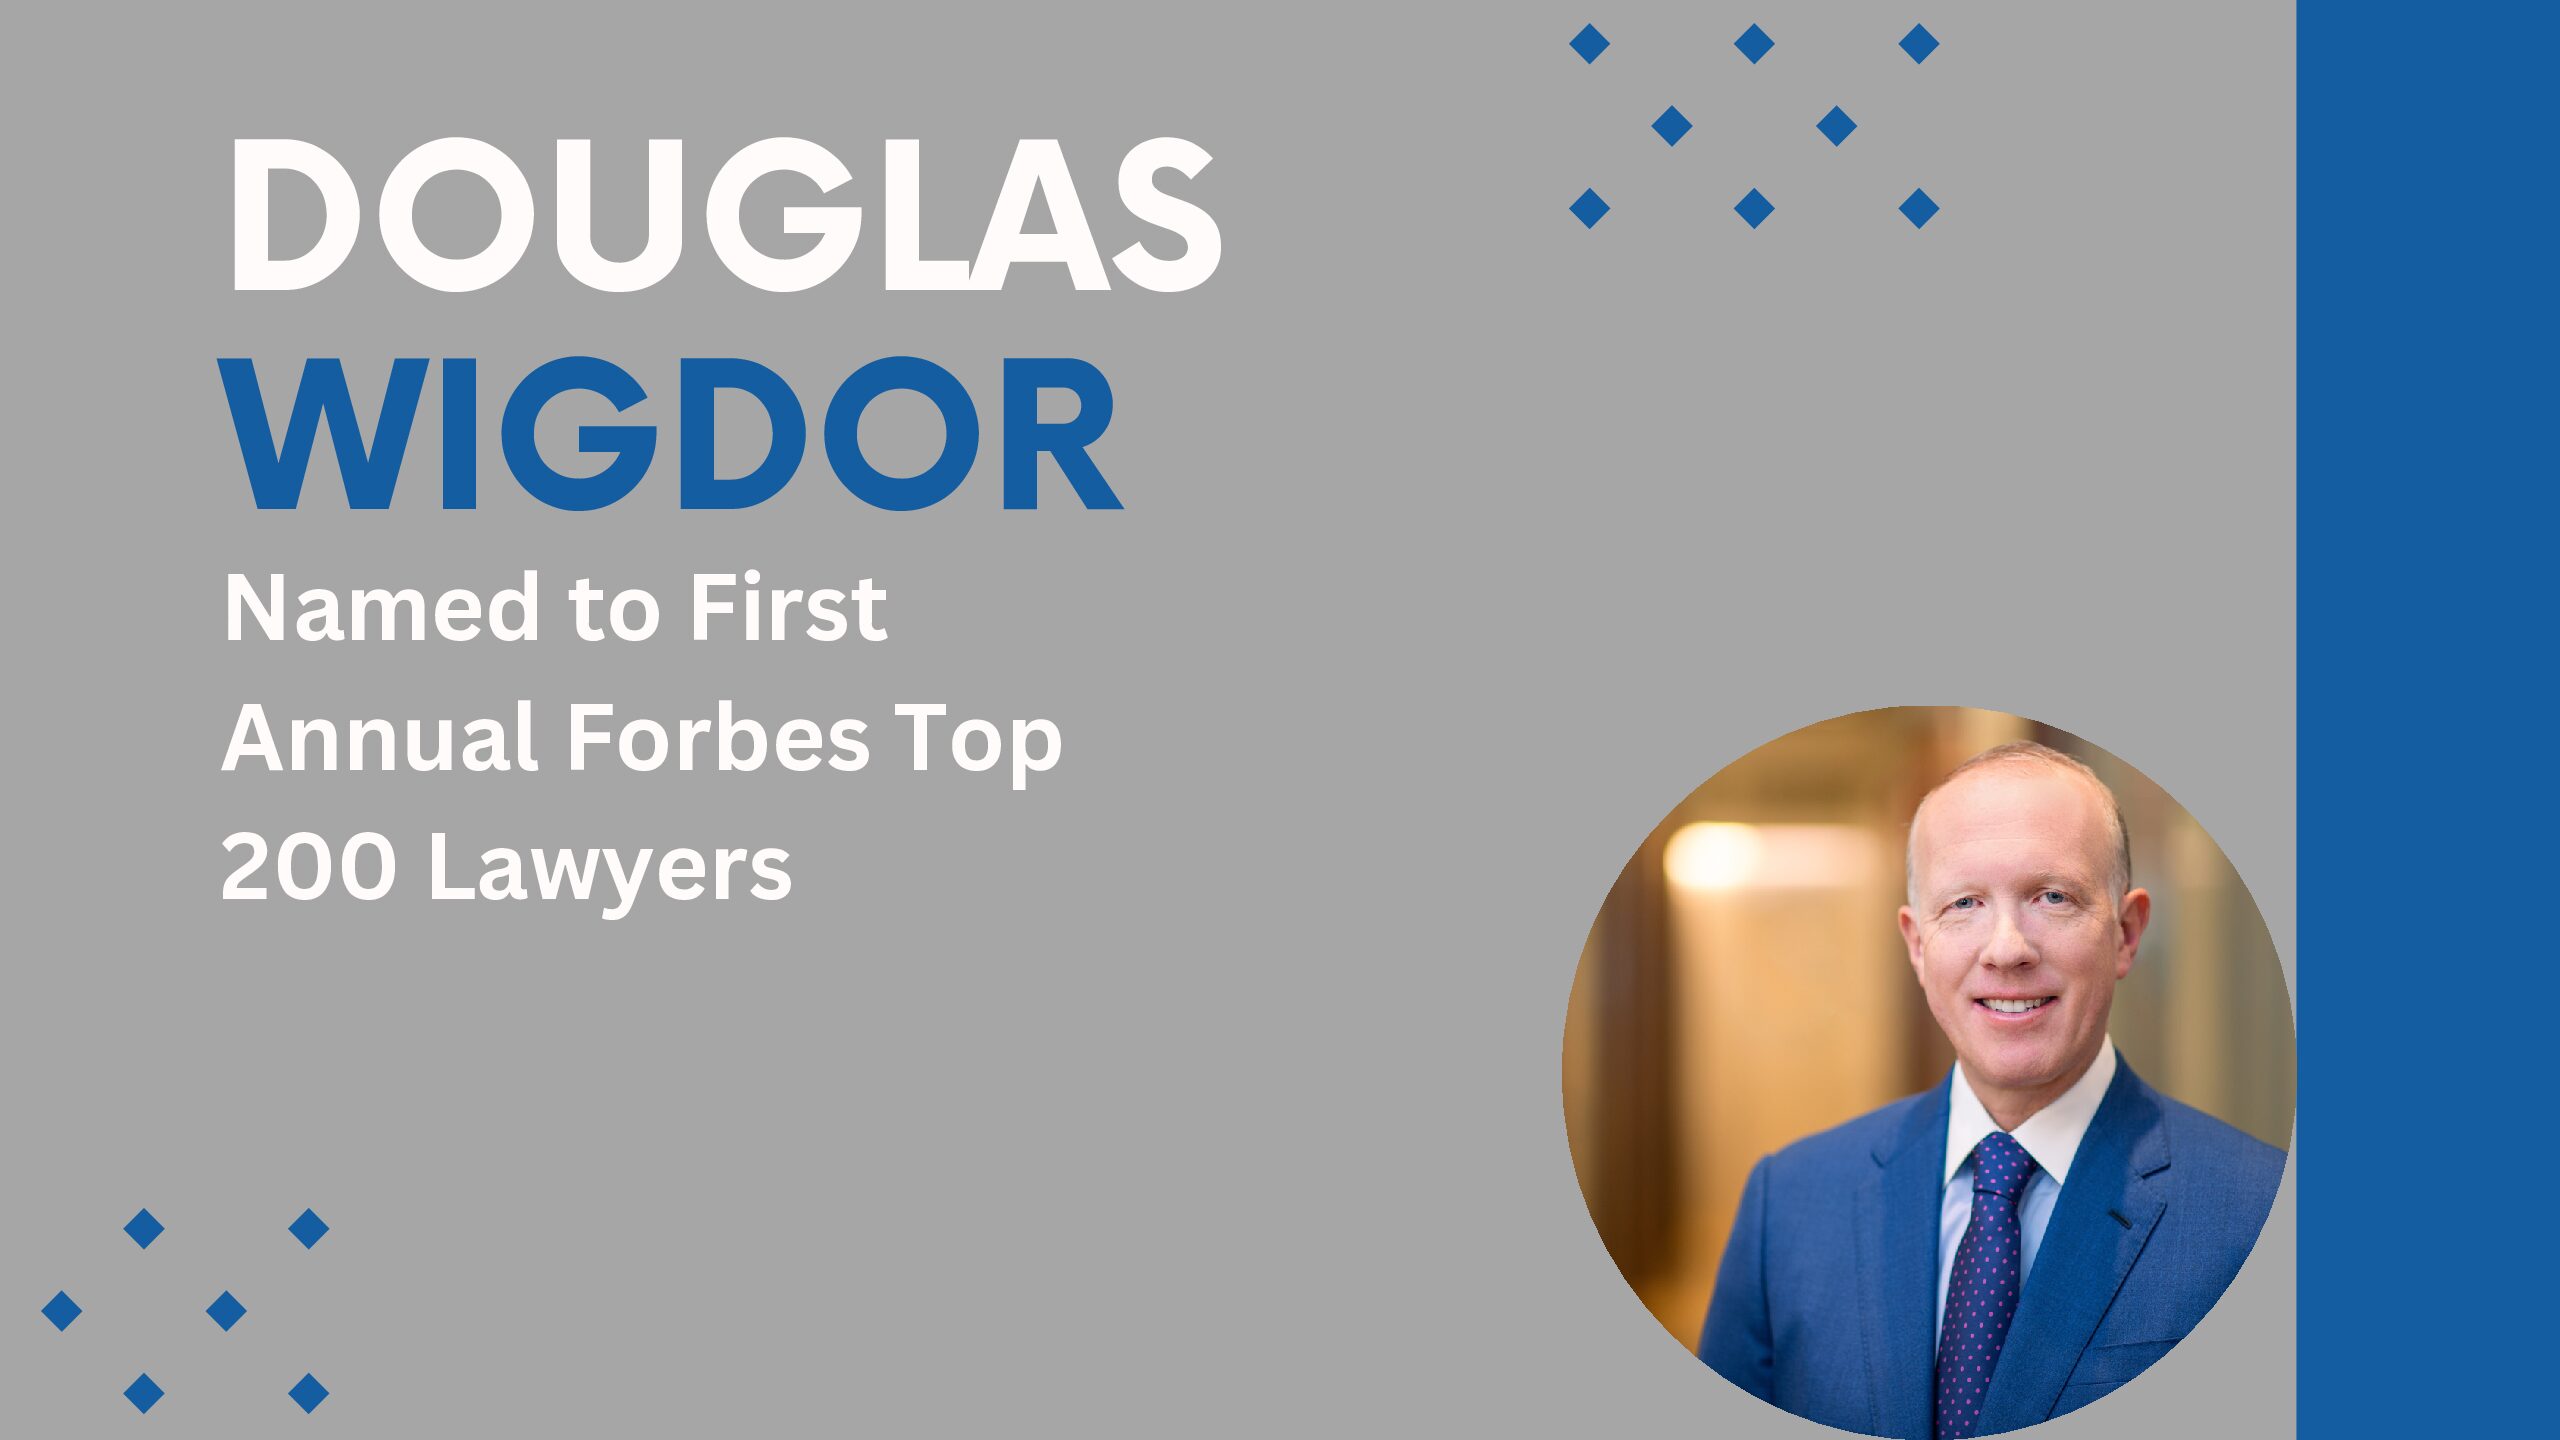 Douglas Wigdor Named To First Annual Forbes Top 200 Lawyers